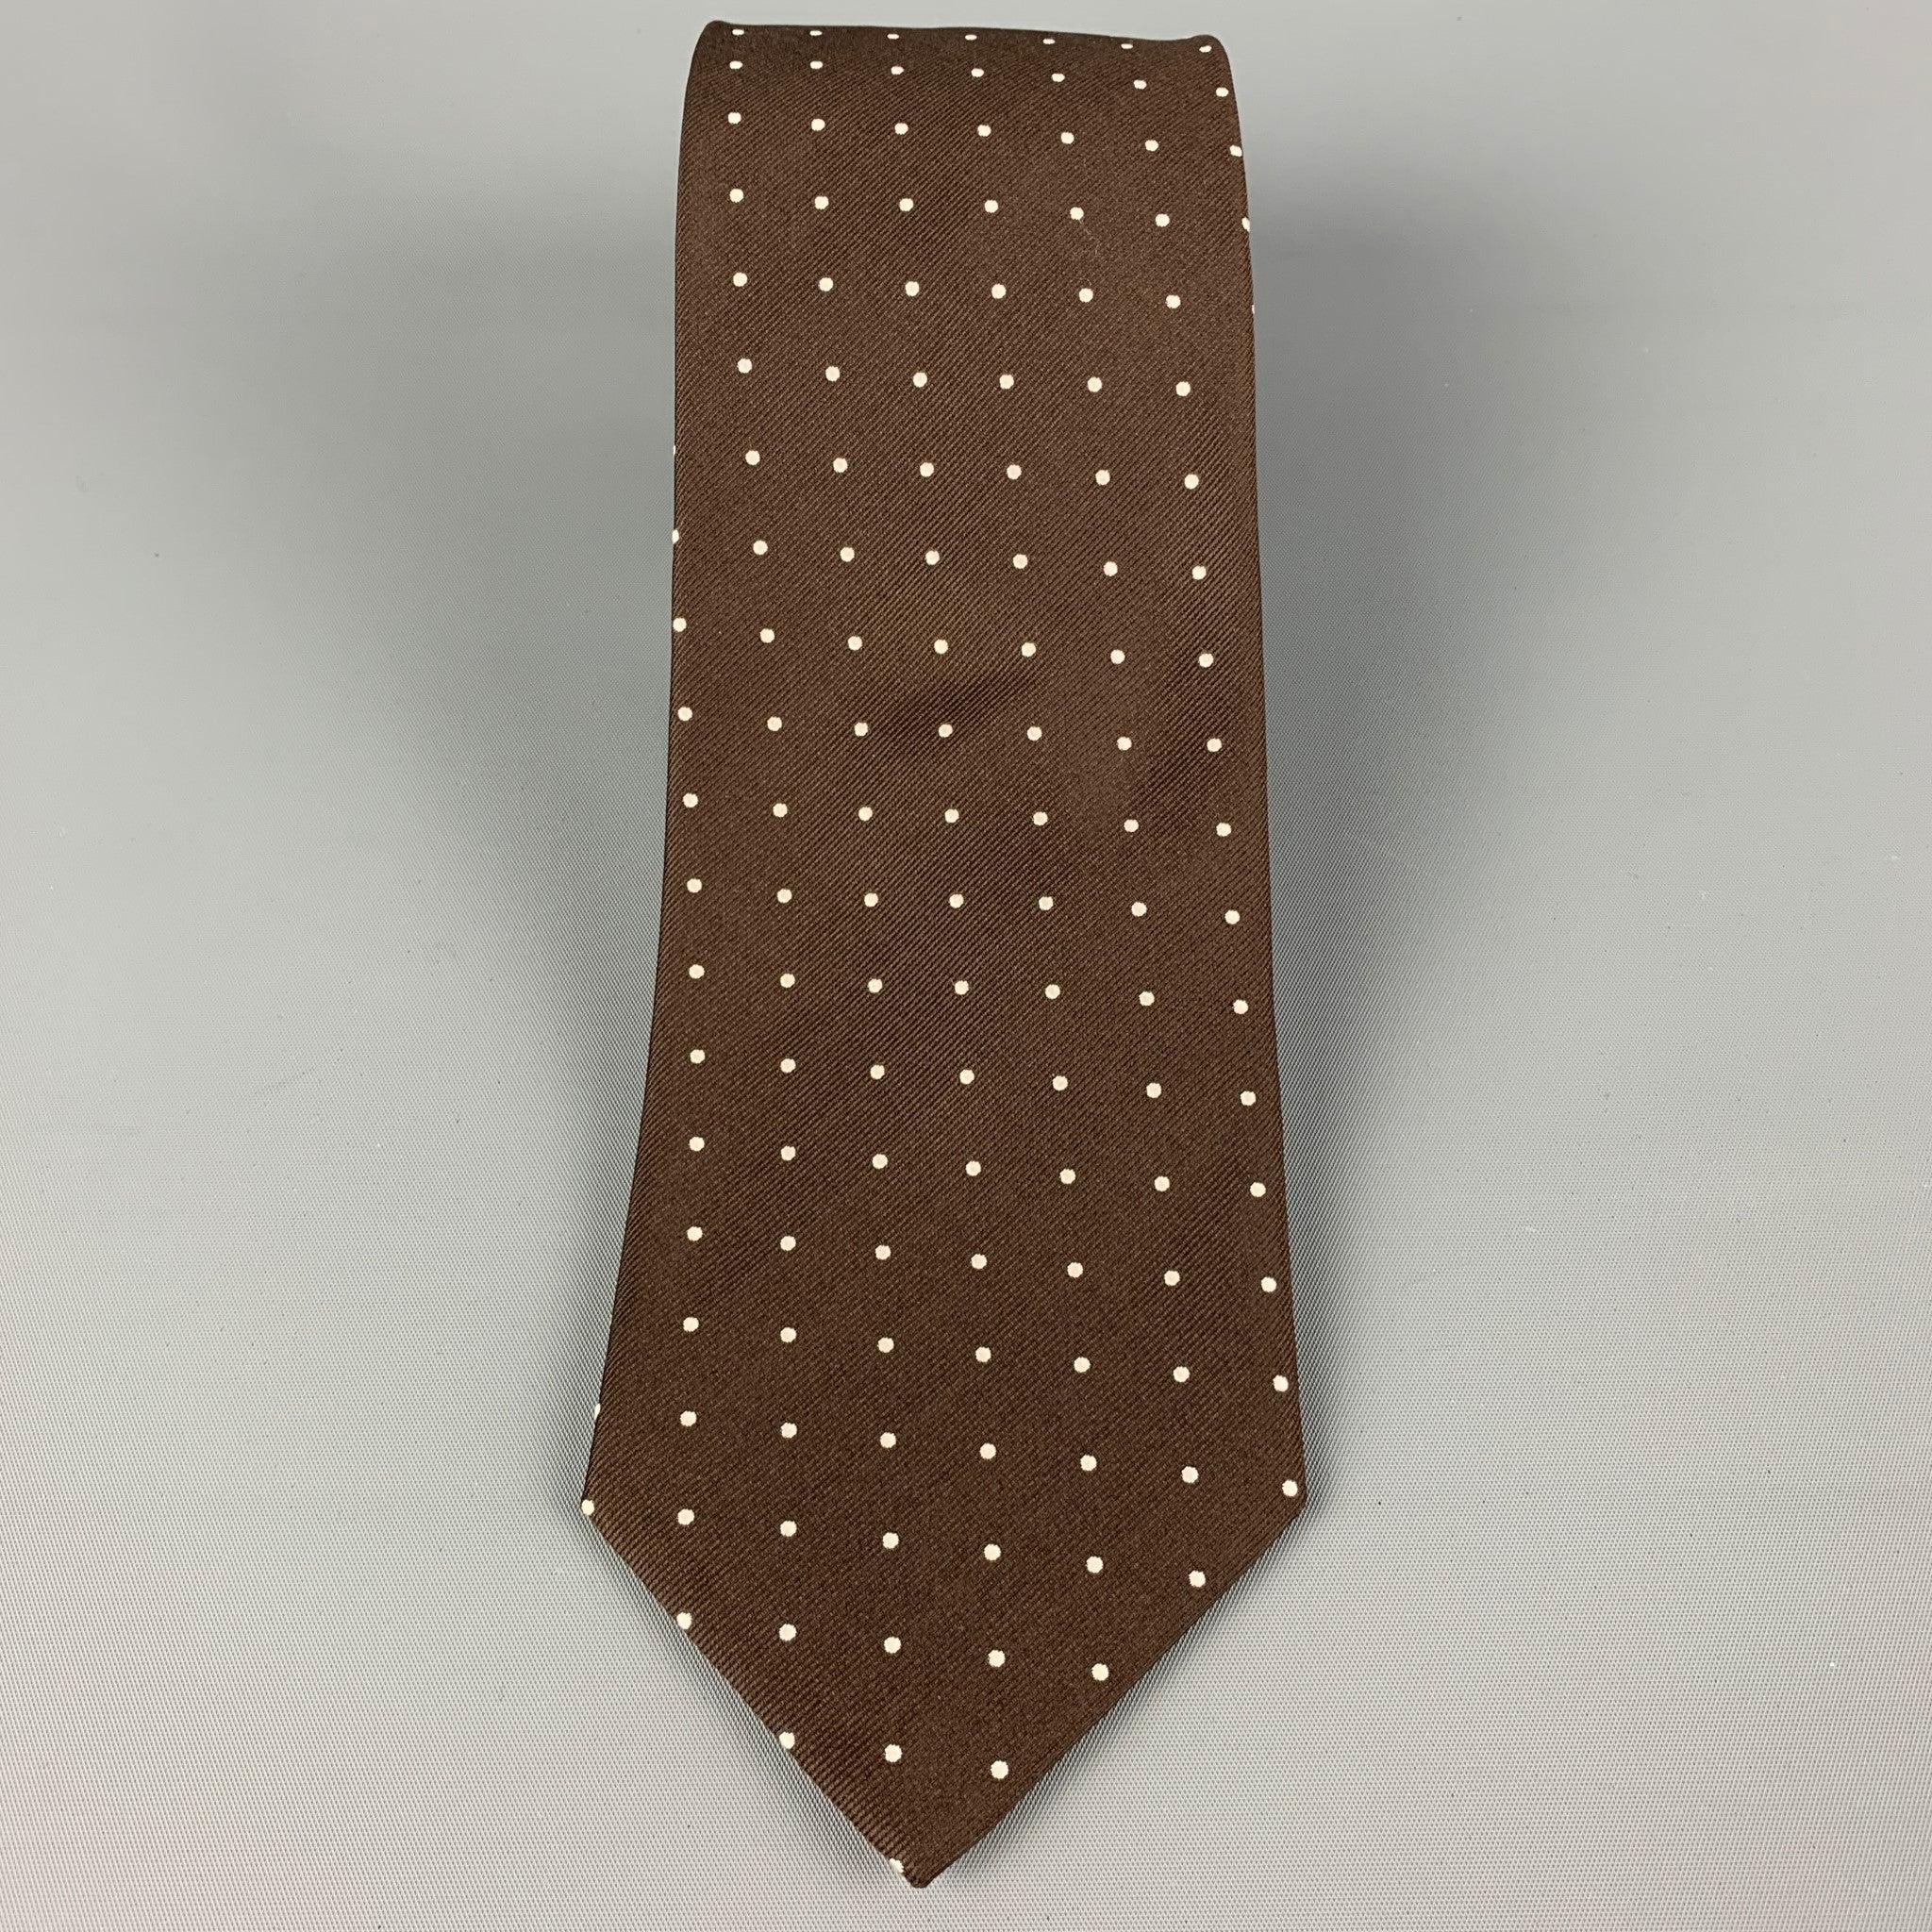 ERMENEGILDO ZEGNA for WILKES BASHFORD
 necktie comes in a brown & white silk with a all over polka dot print. Made in Italy . Very Good Pre-Owned Condition.Width: 3.5 inches Length: 58 inches 
  
  
  
 Sui Generis Reference: 120415
 Category: Tie
